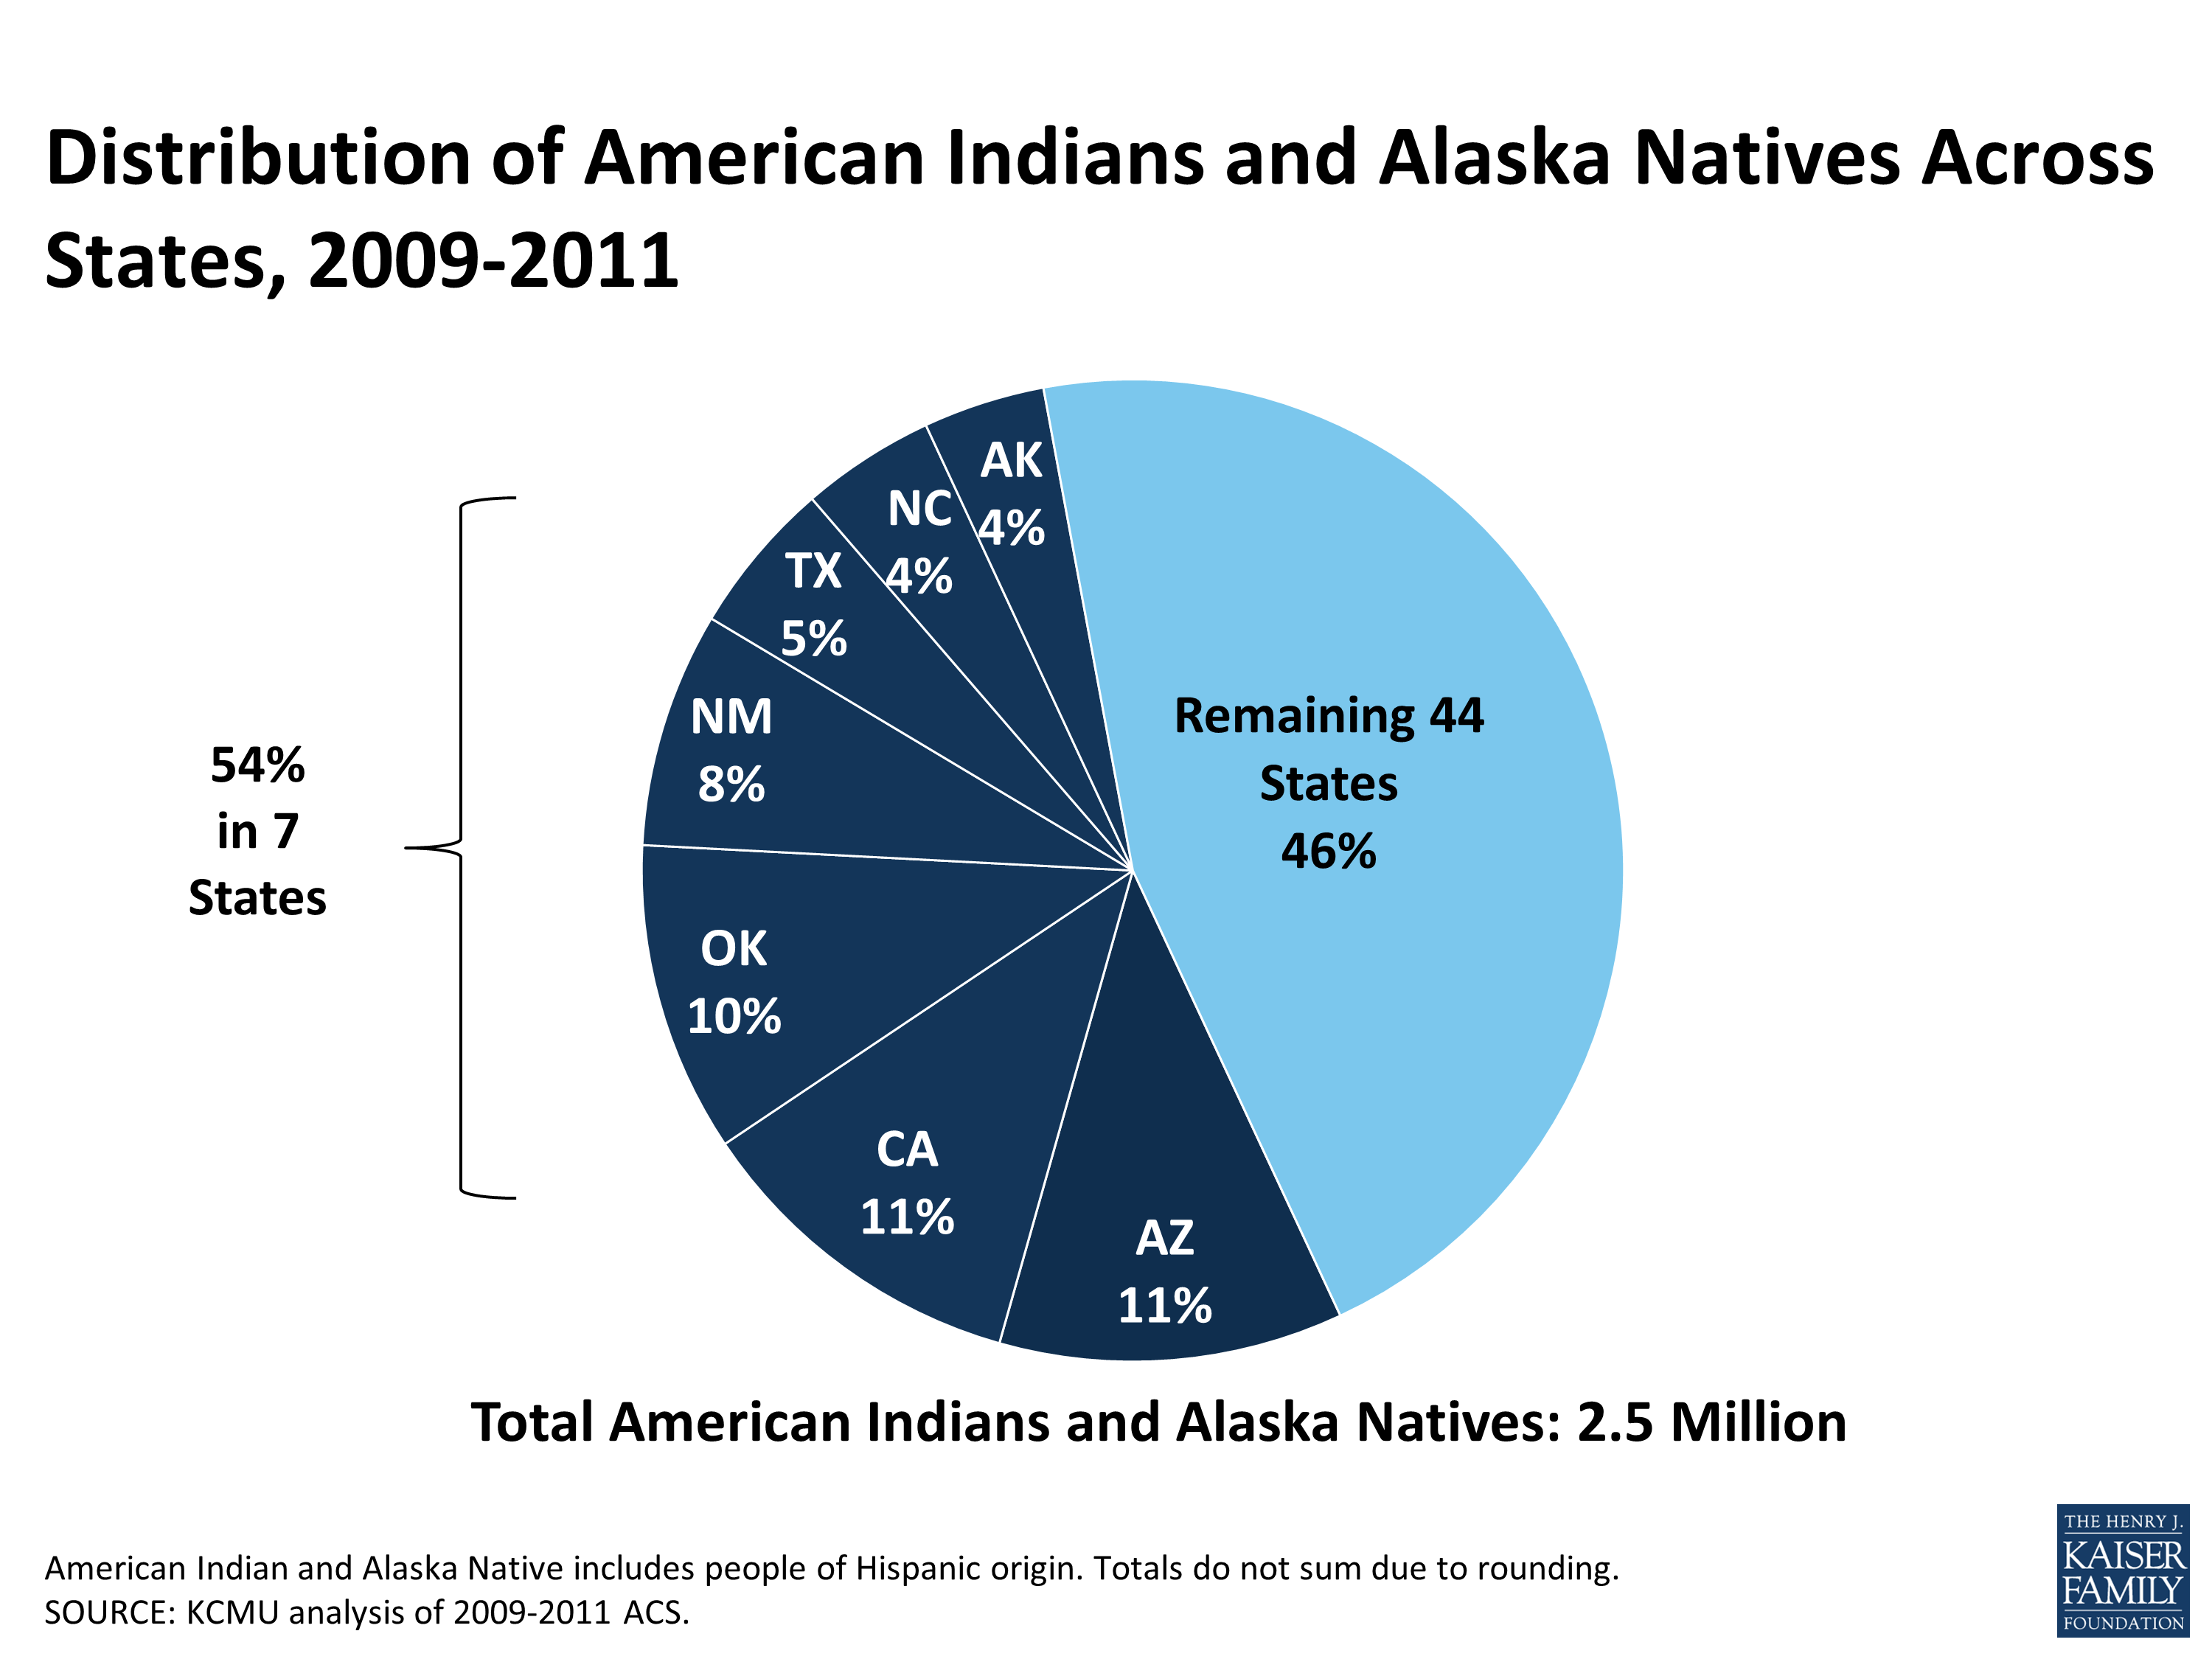 Health Coverage And Care For American Indians And Alaska Natives 